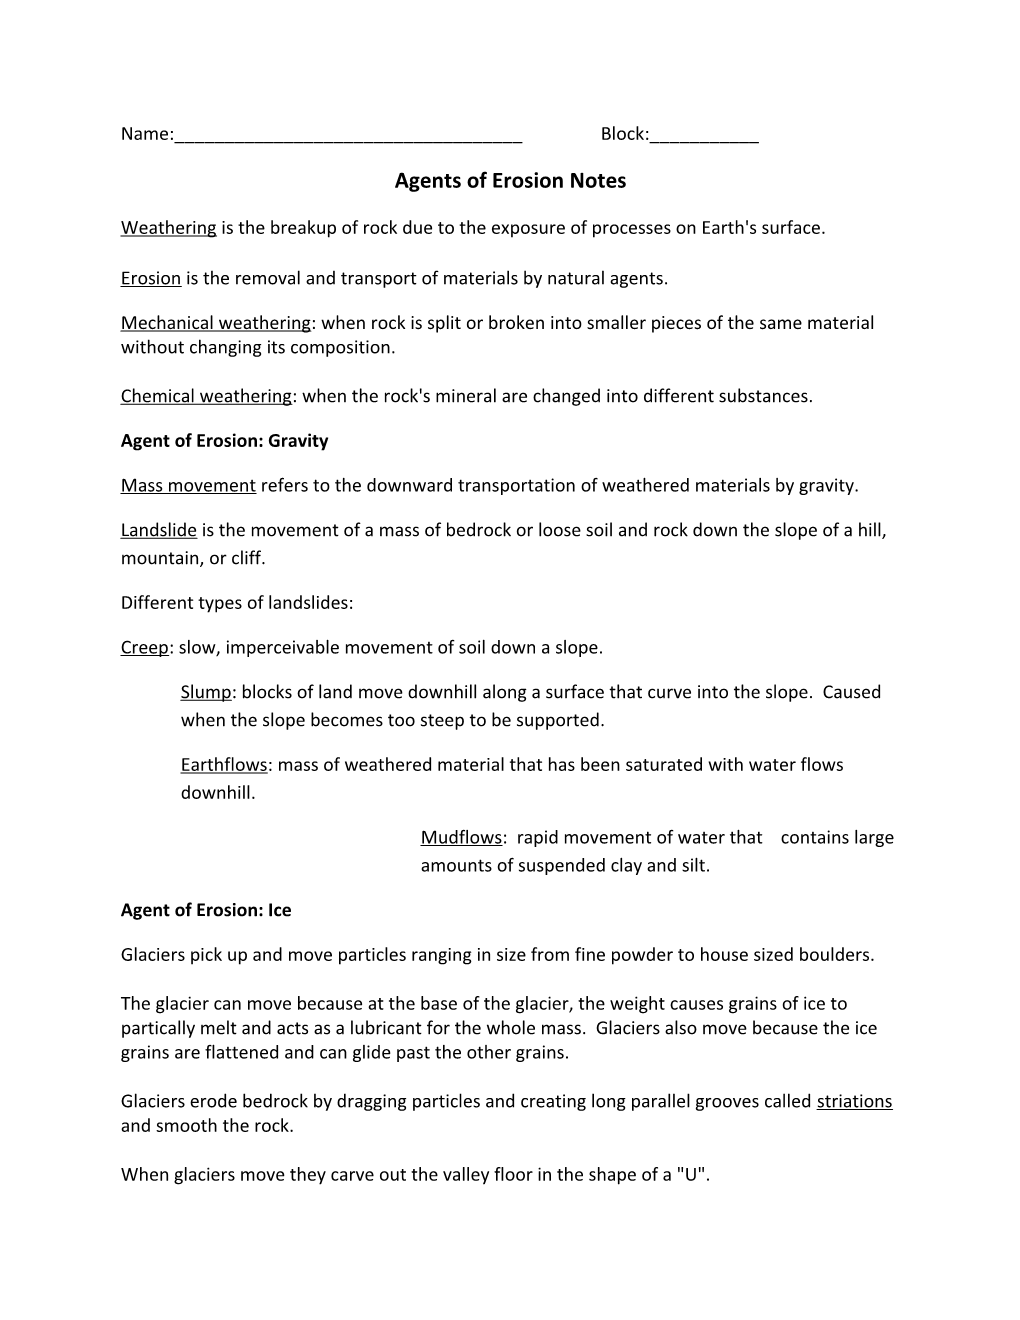 Agents of Erosion Notes